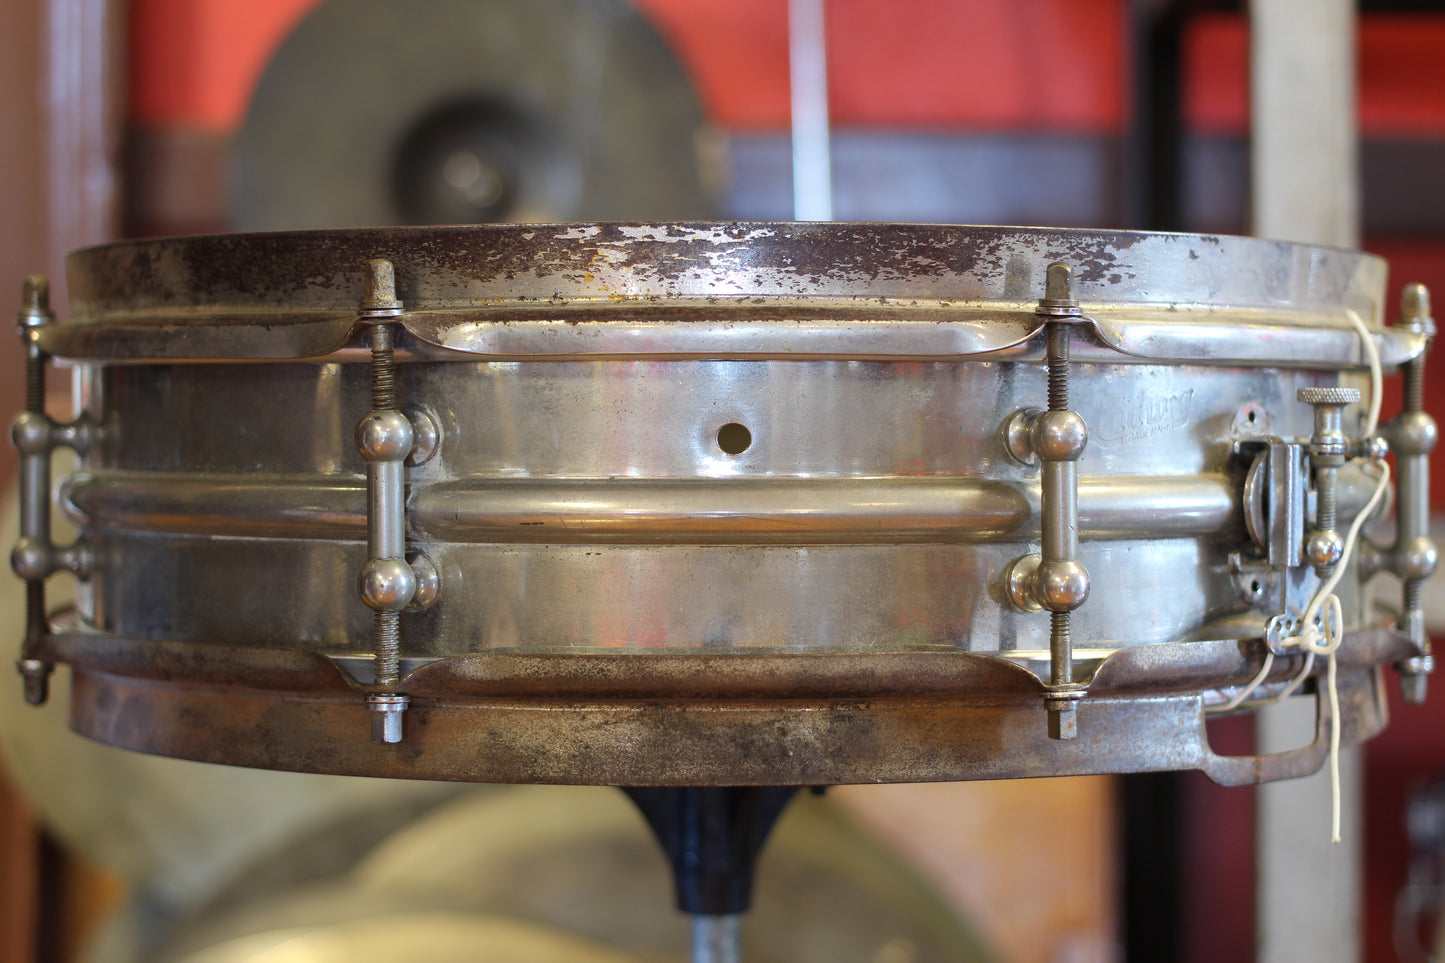 1920's Ludwig 'Dance Model' Snare Drum 4"x14" Nickel over Brass 2-Piece shell